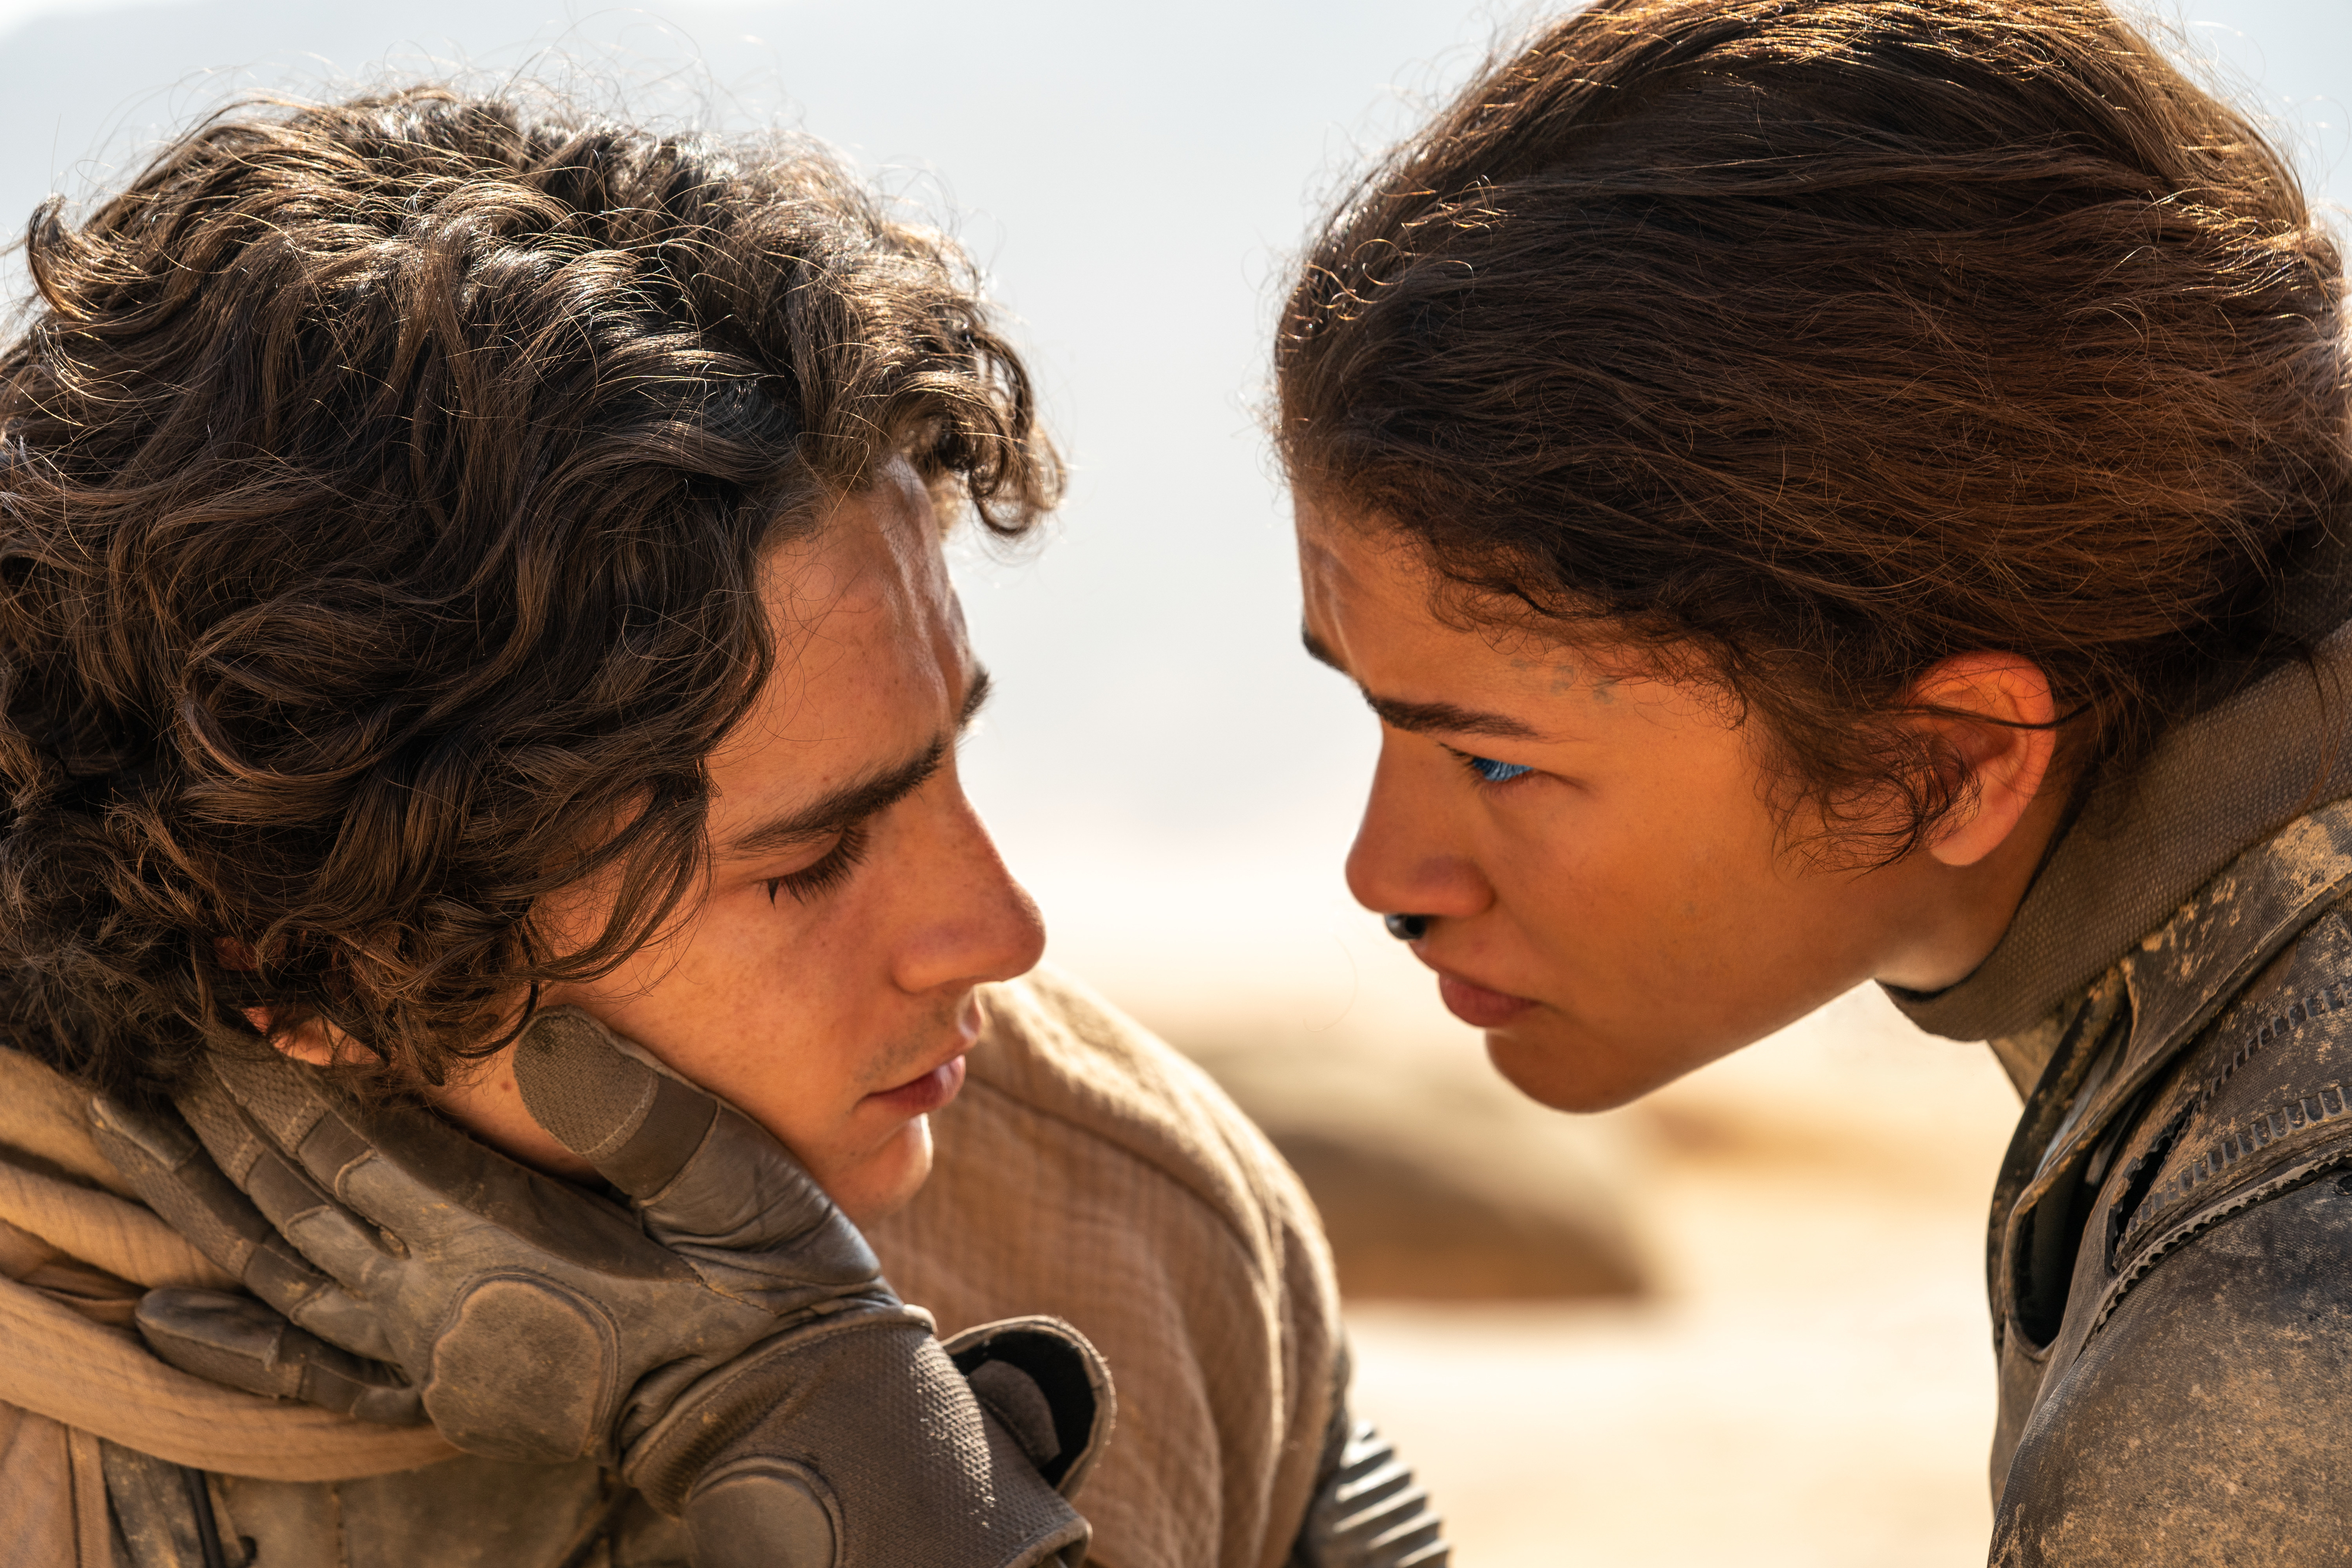 Closeup of Paul and Chani in "Dune: Part Two"